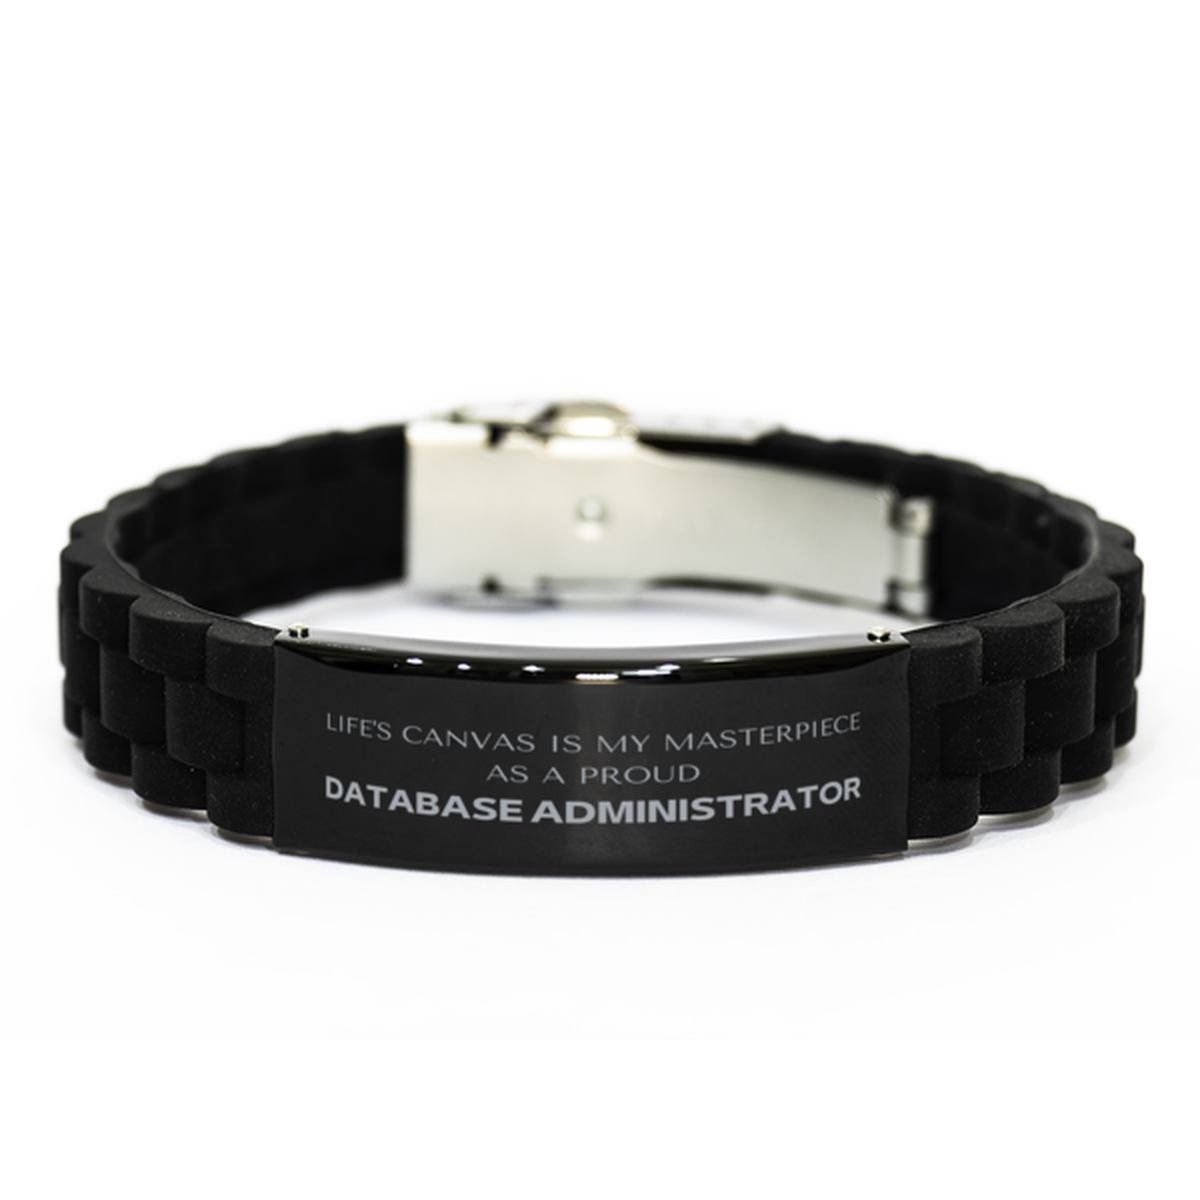 Proud Database Administrator Gifts, Life's canvas is my masterpiece, Epic Birthday Christmas Unique Black Glidelock Clasp Bracelet For Database Administrator, Coworkers, Men, Women, Friends